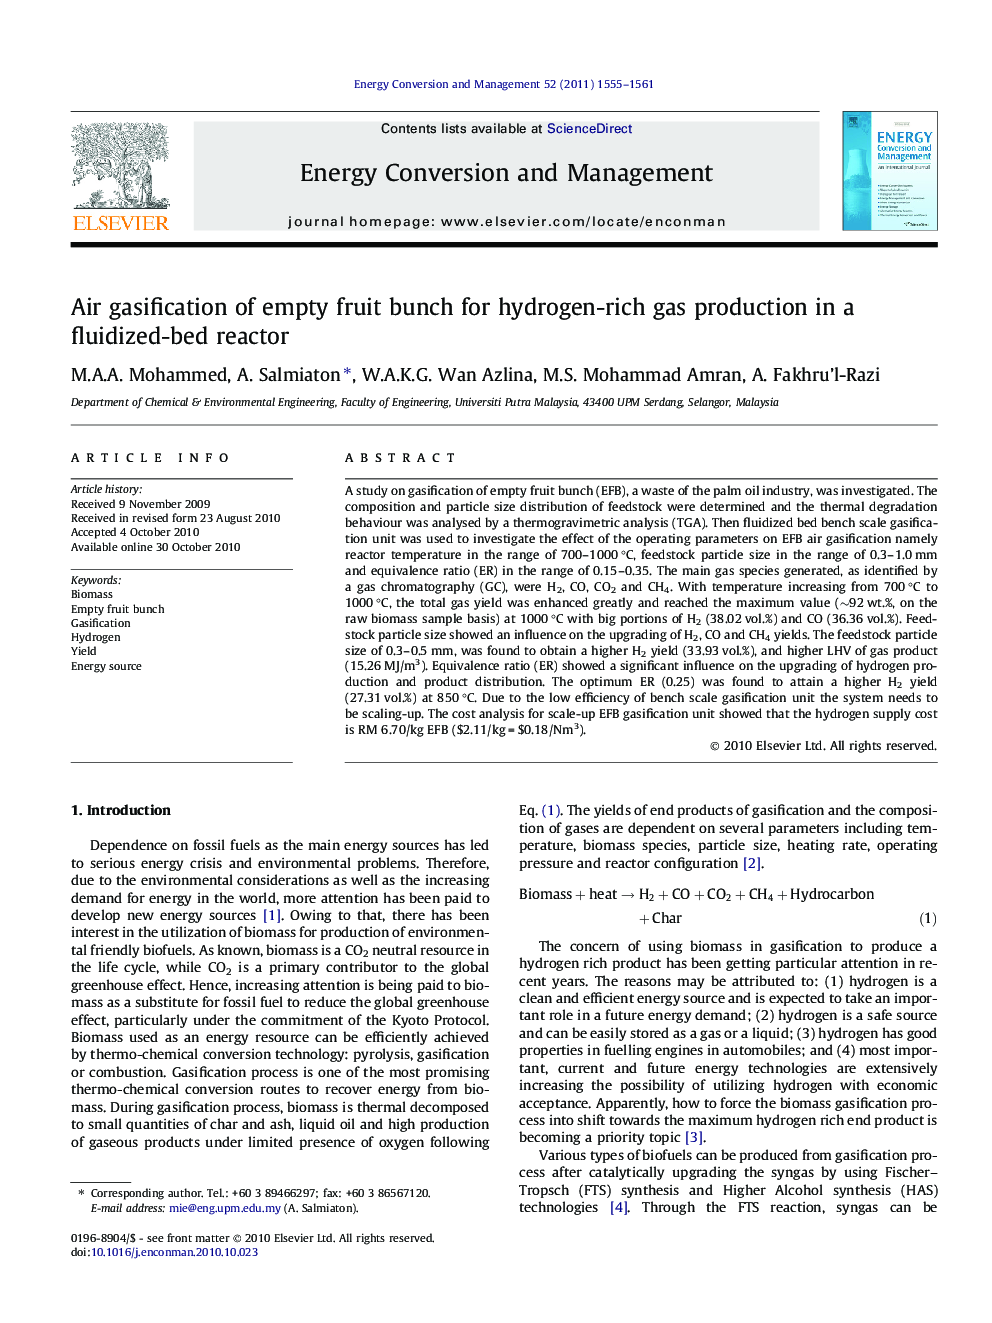 Air gasification of empty fruit bunch for hydrogen-rich gas production in a fluidized-bed reactor